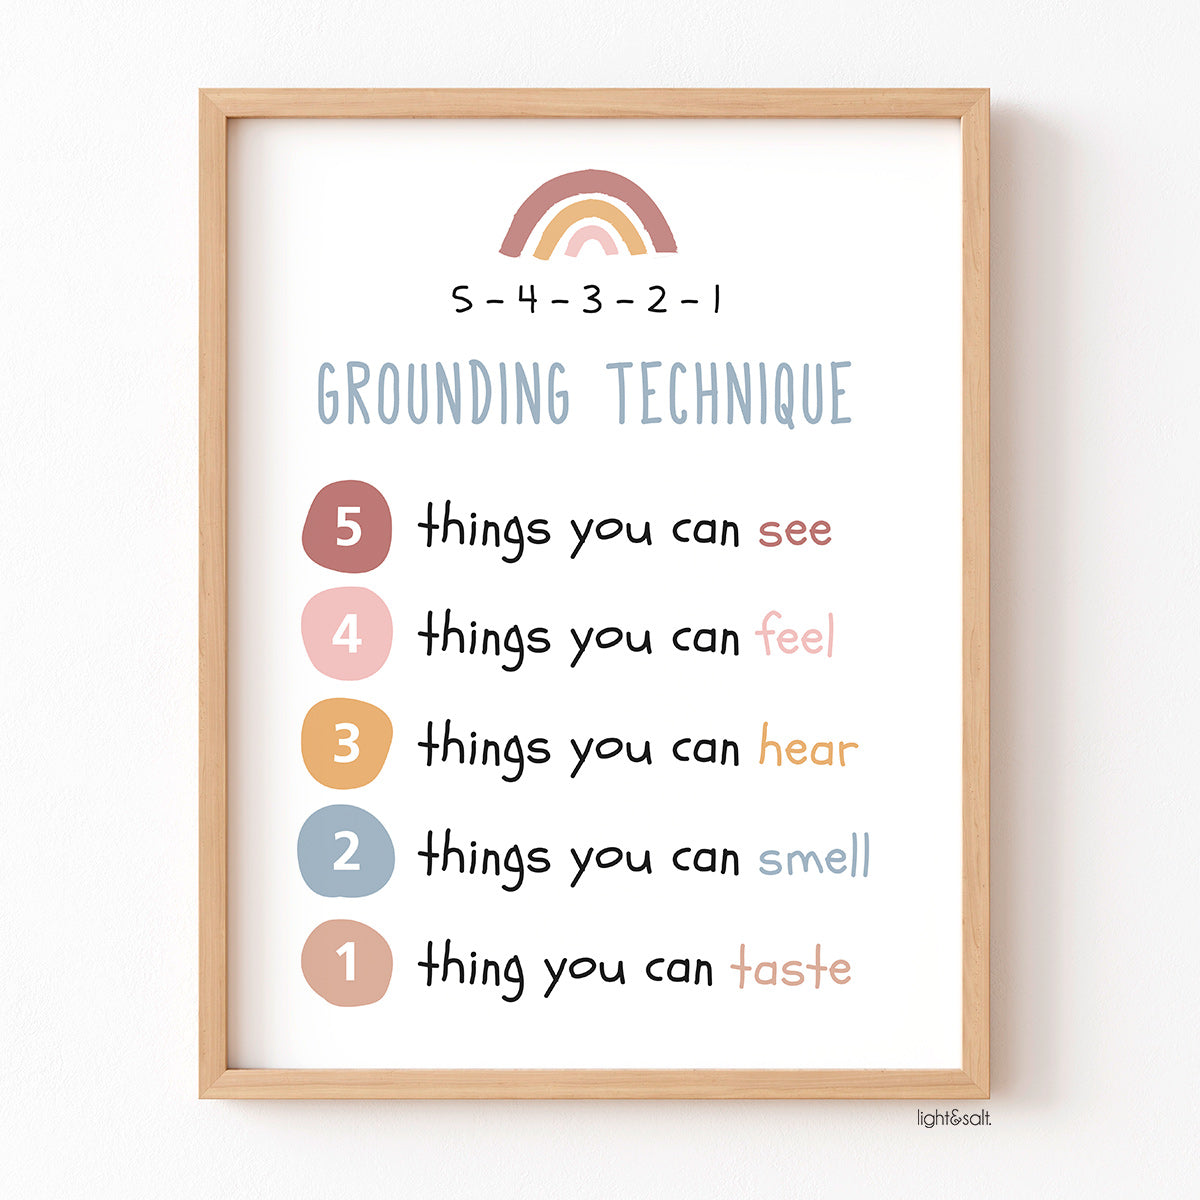 Grounding technique poster, coping skills, 54321 exercise